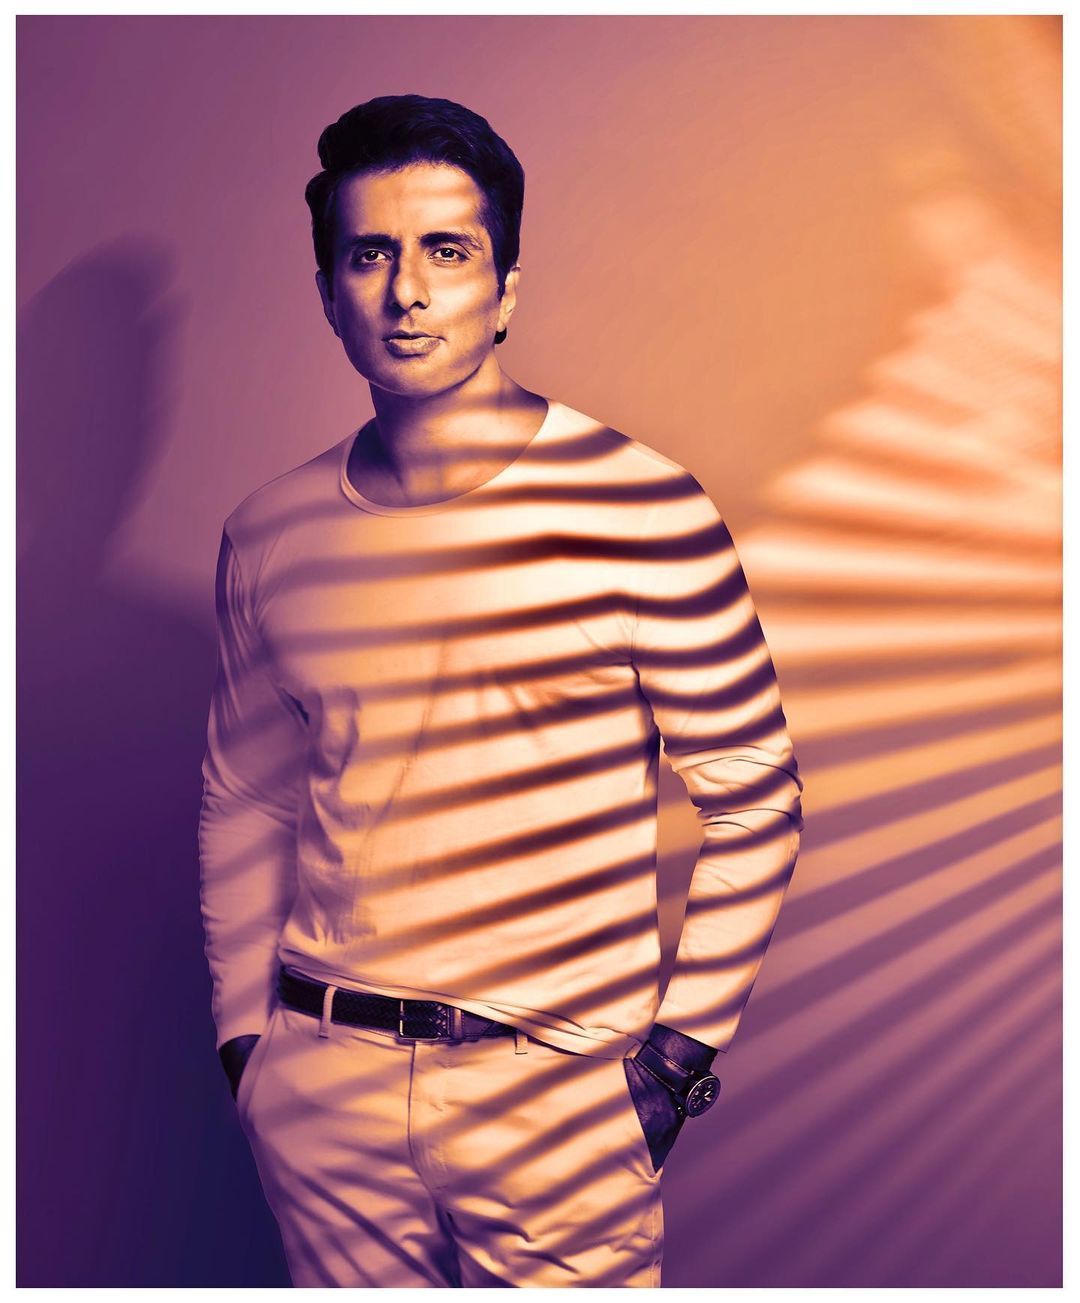 Sonu Sood Says No To VIllainous Roles After Playing Real Life Messiah To The Underprivileged During The Covid-19 Pandemic